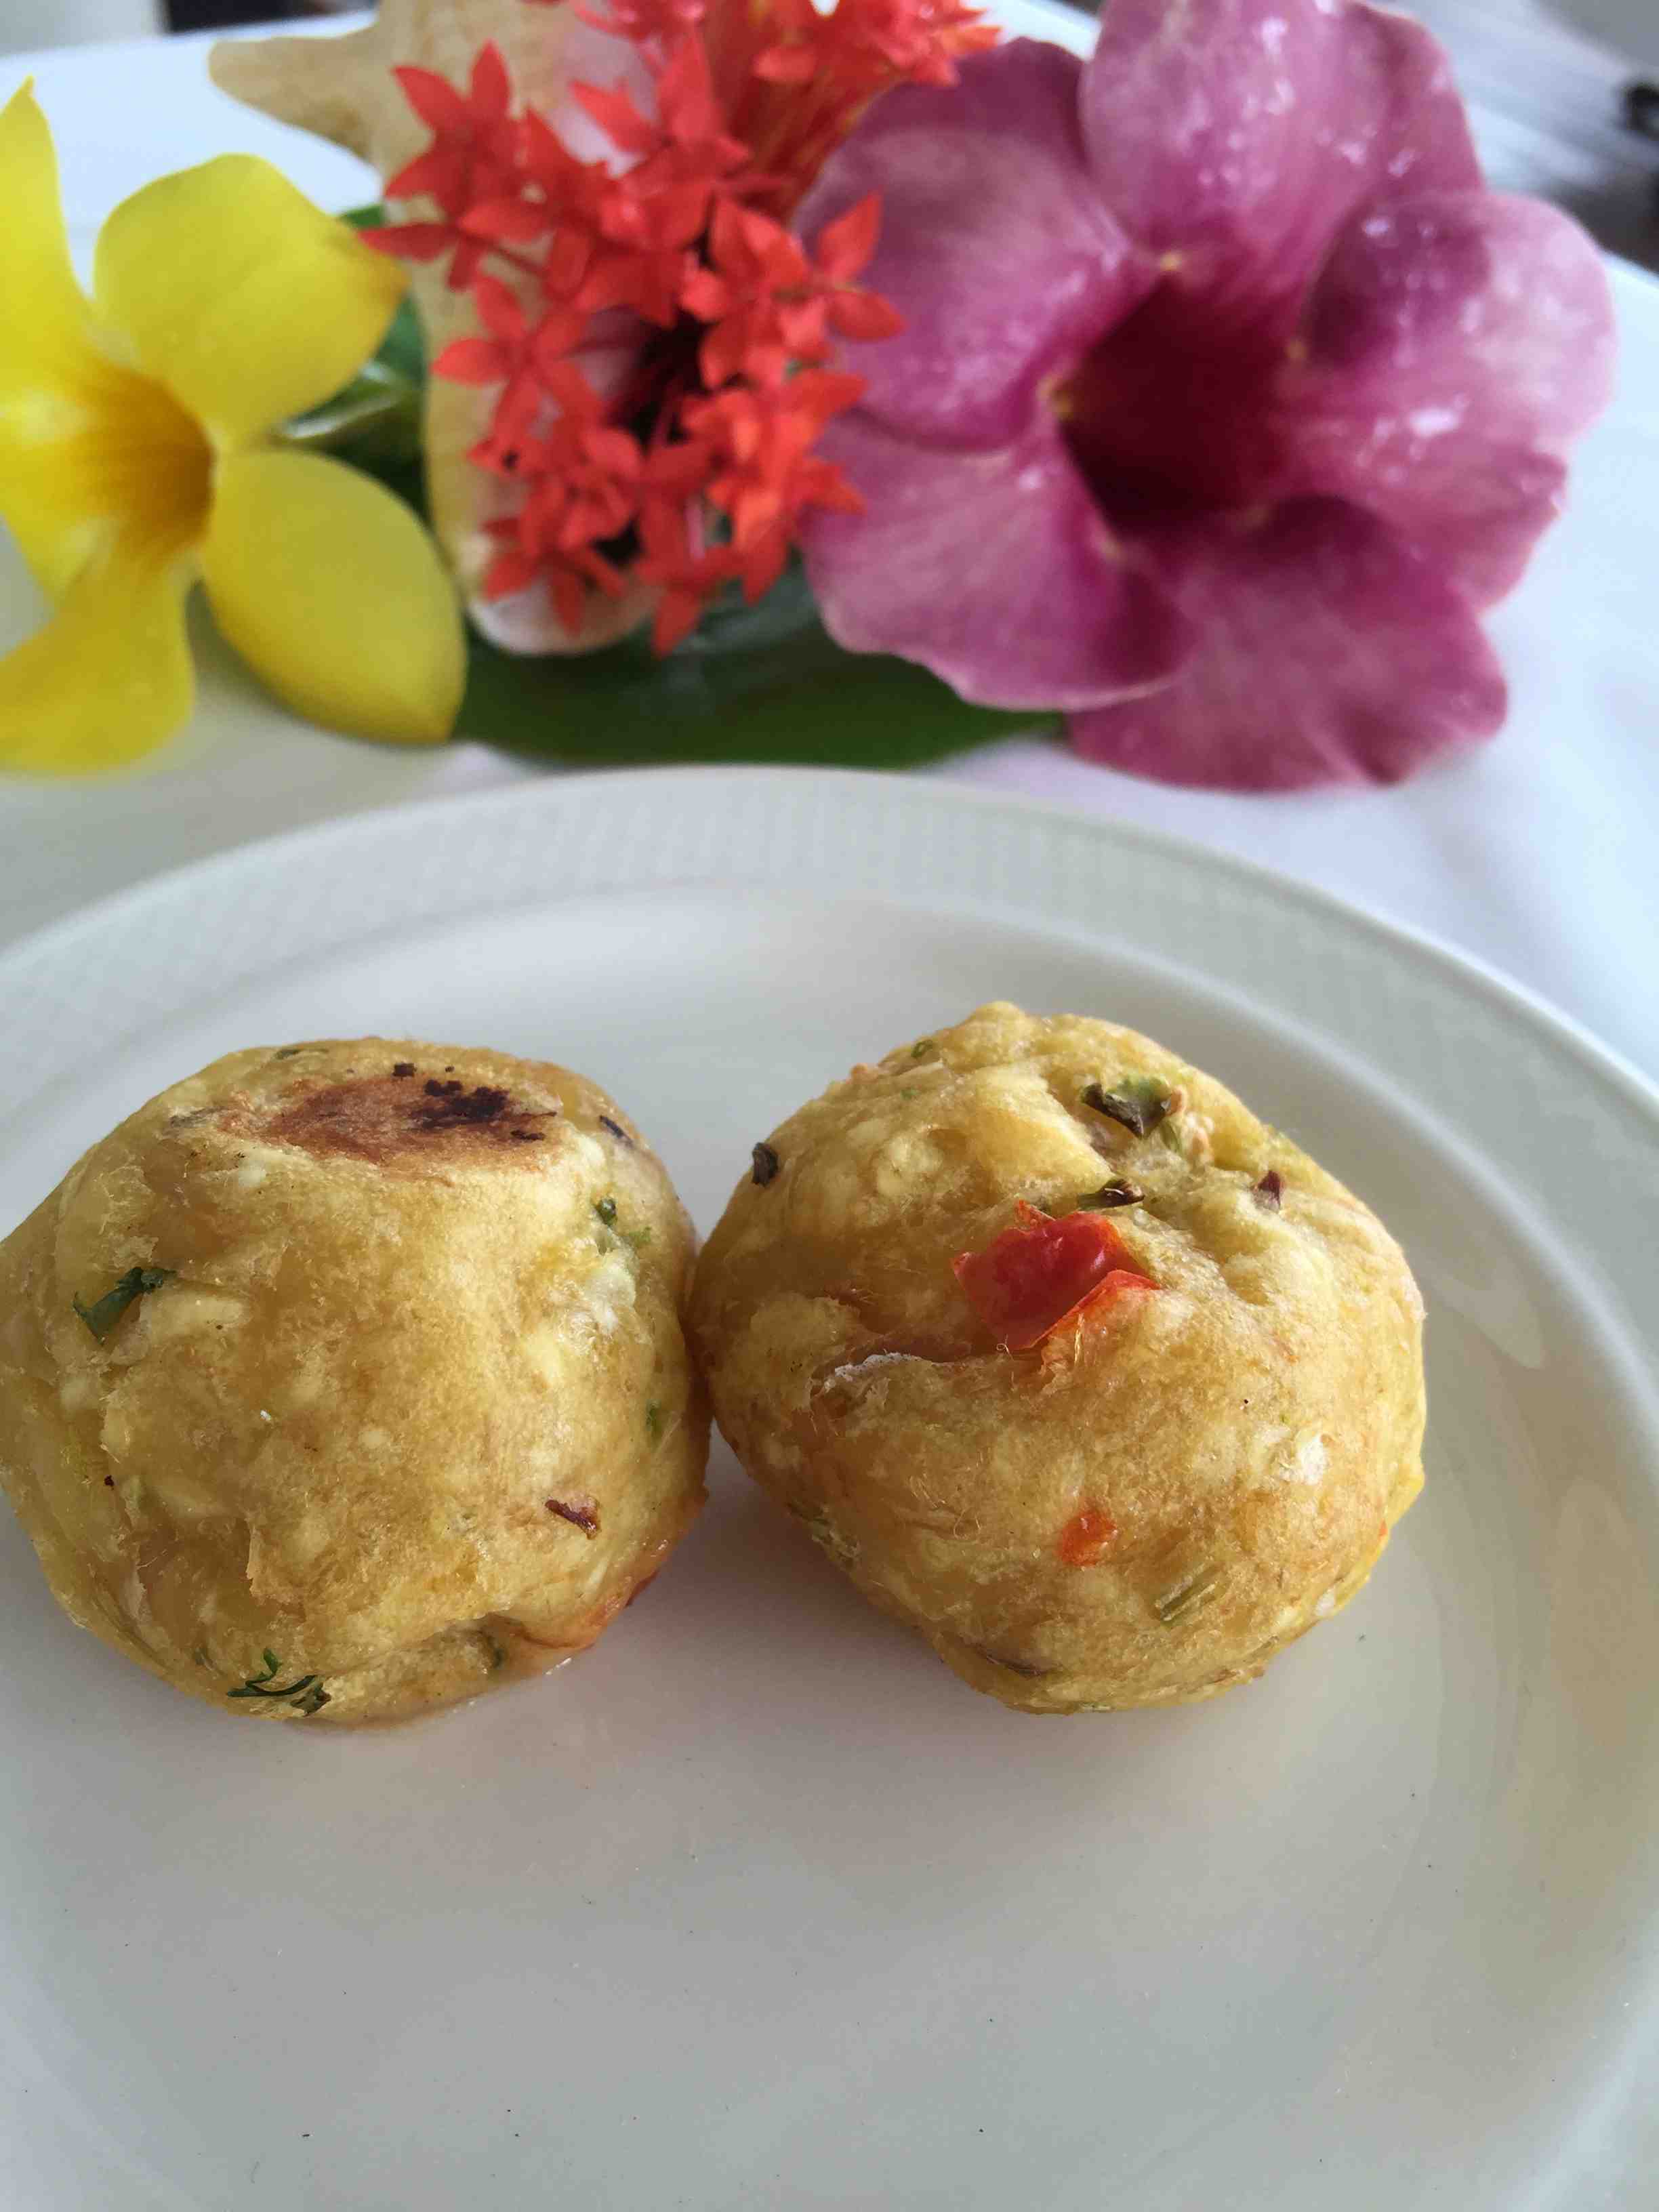 Baked breadfruit balls are offered at Calabash Cove Resort & Spa in St. Lucia.